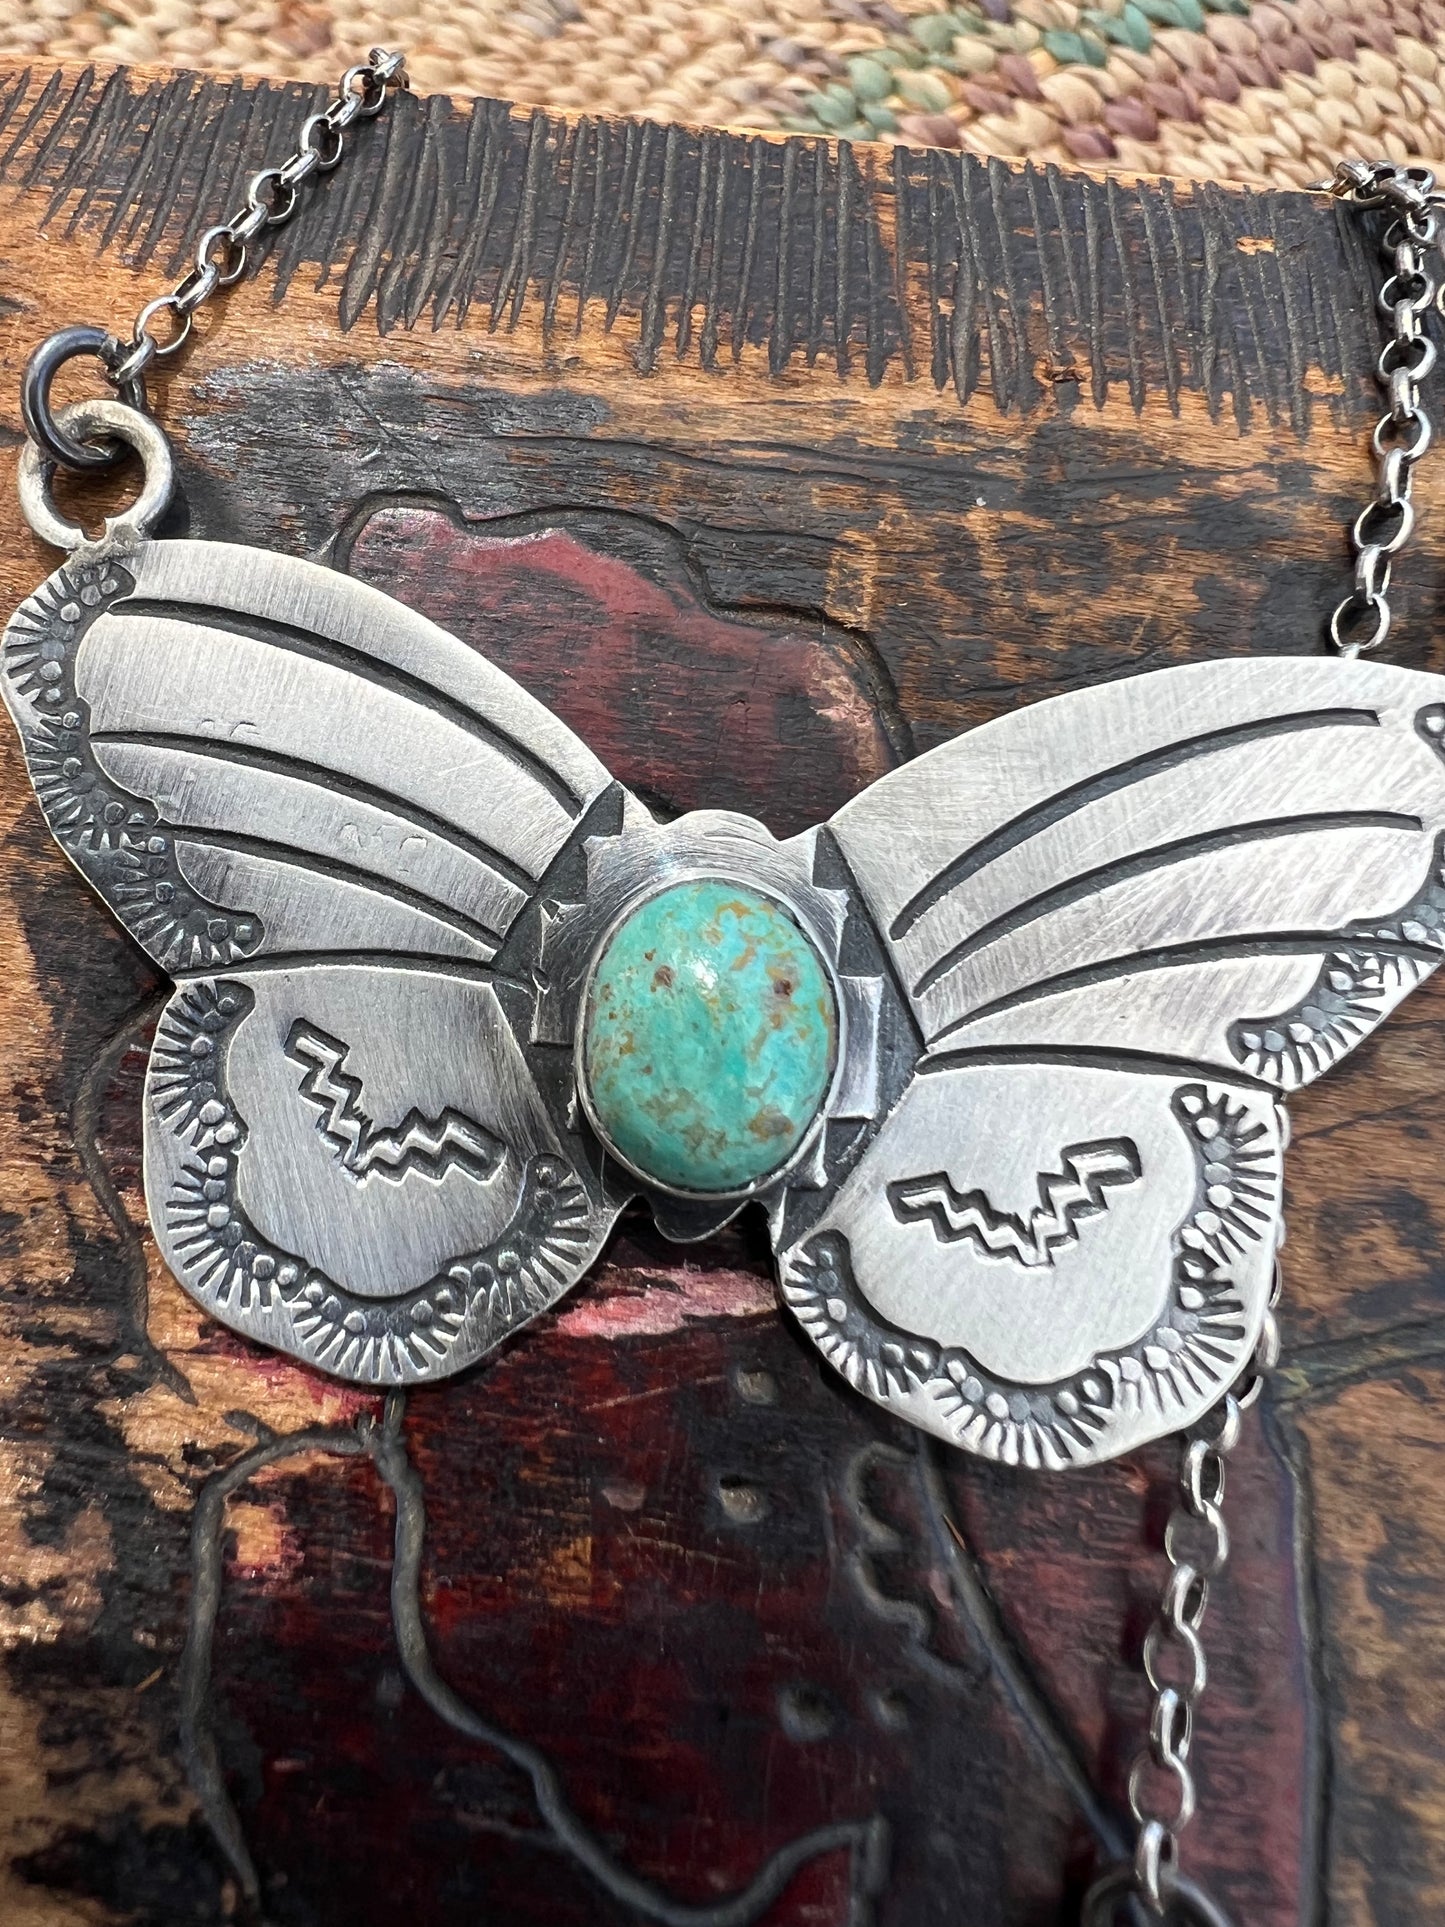 Stamped Butterfly turquoise necklace